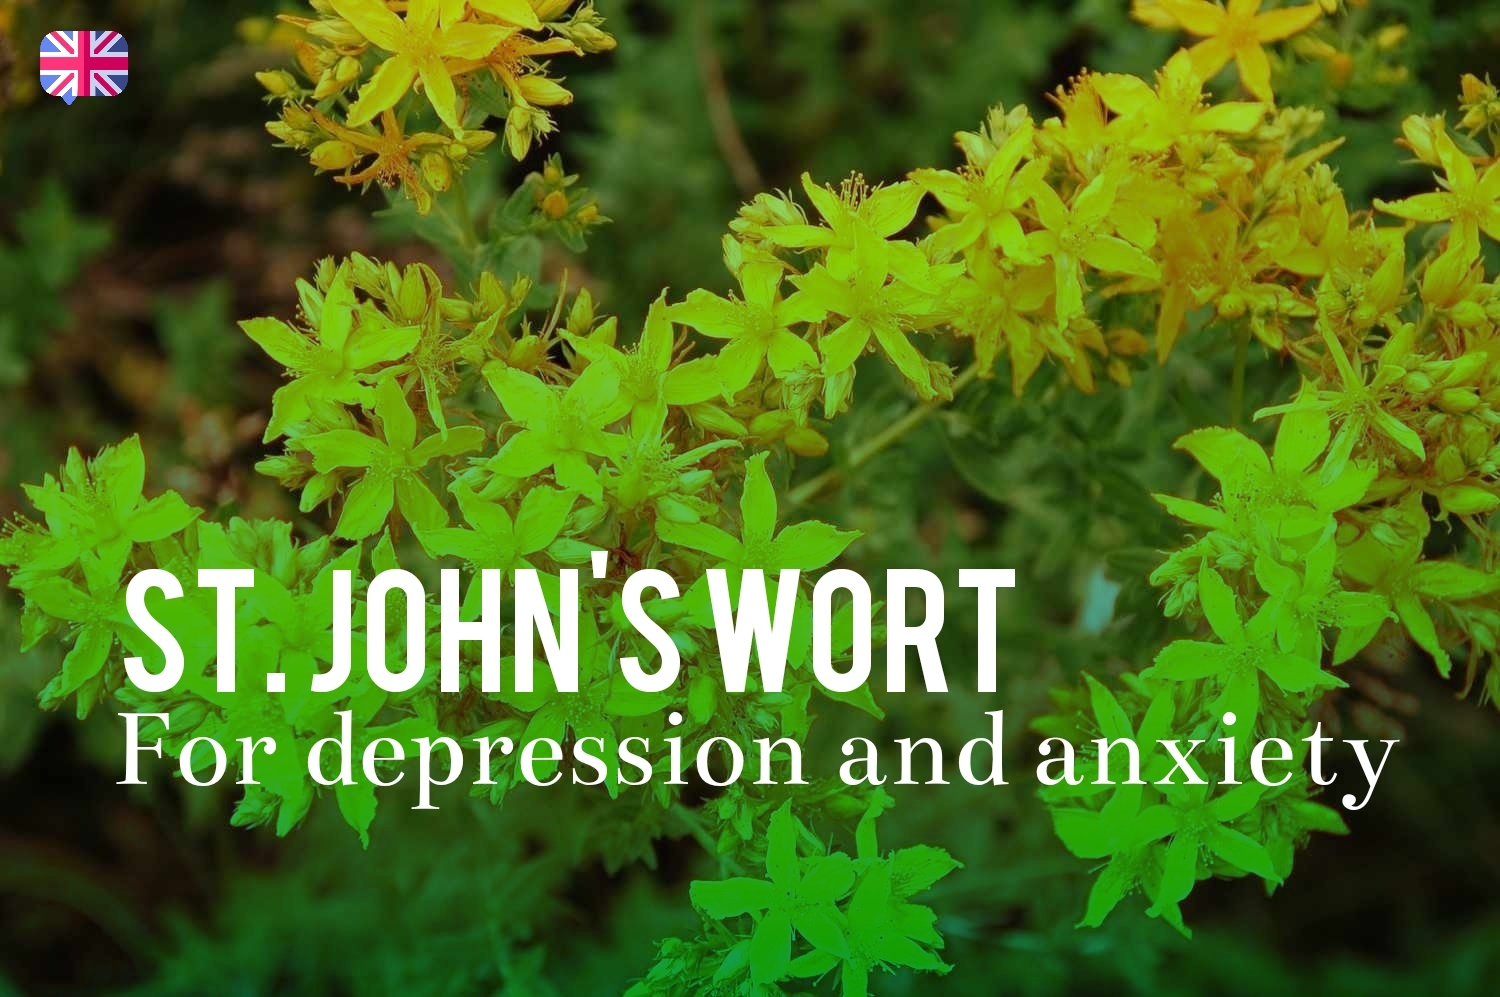 St. John's Wort for depression and anxiety